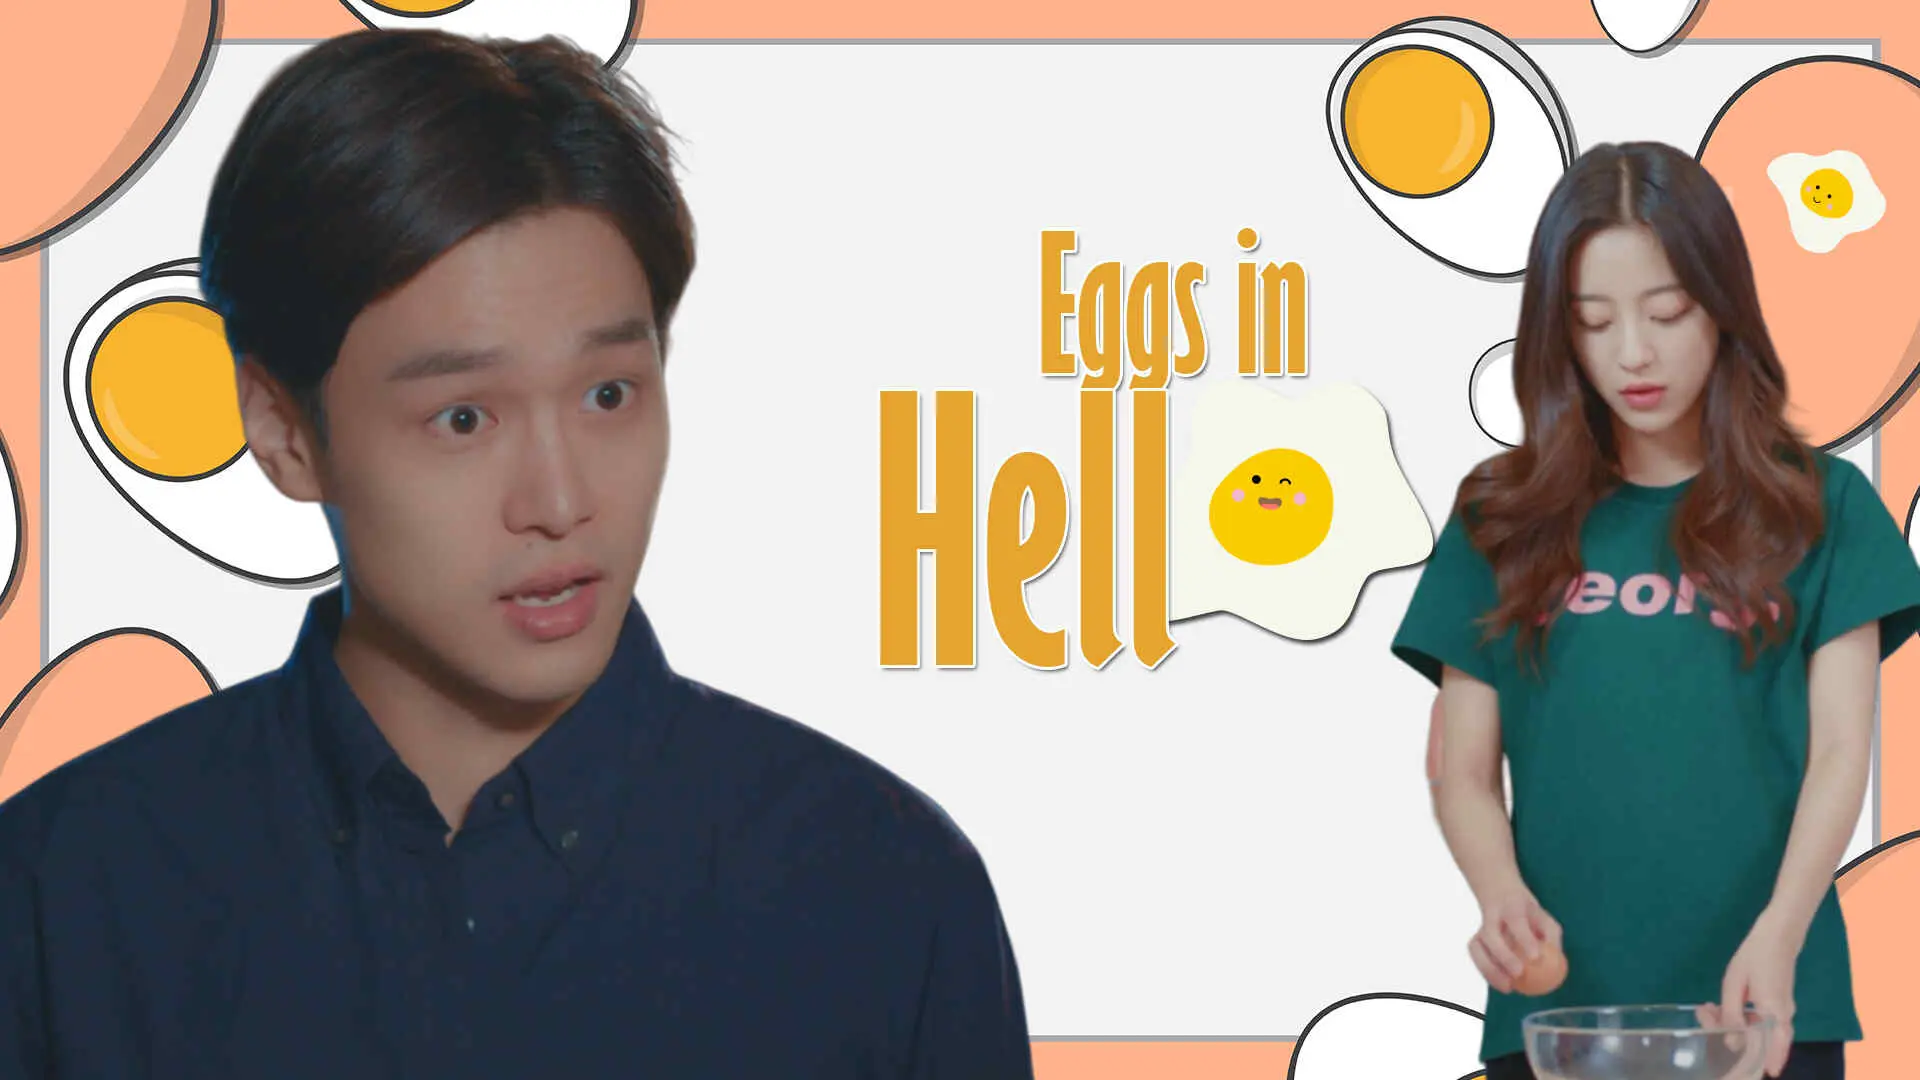 Eggs In Hell